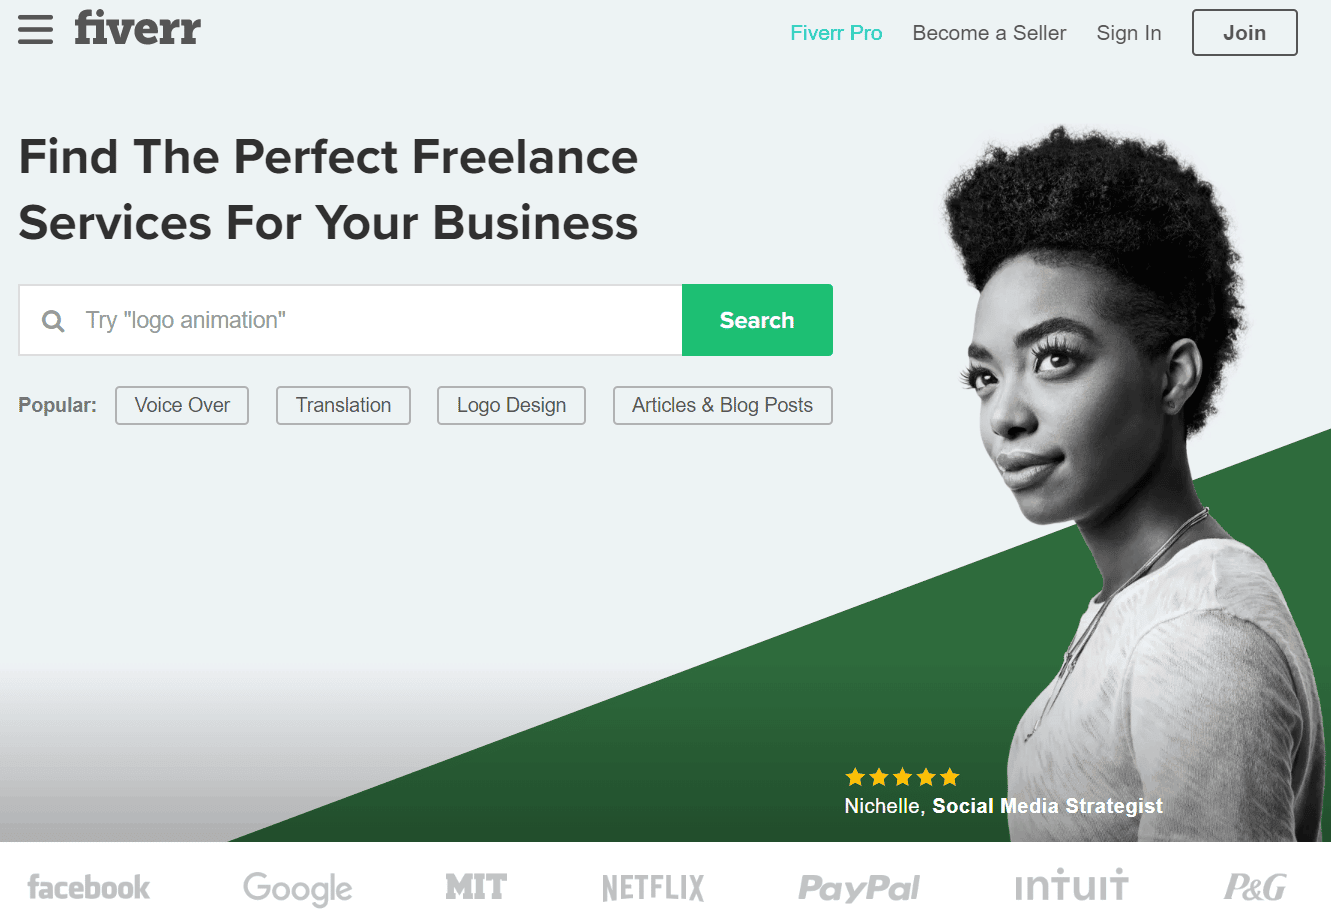 fiverr overview